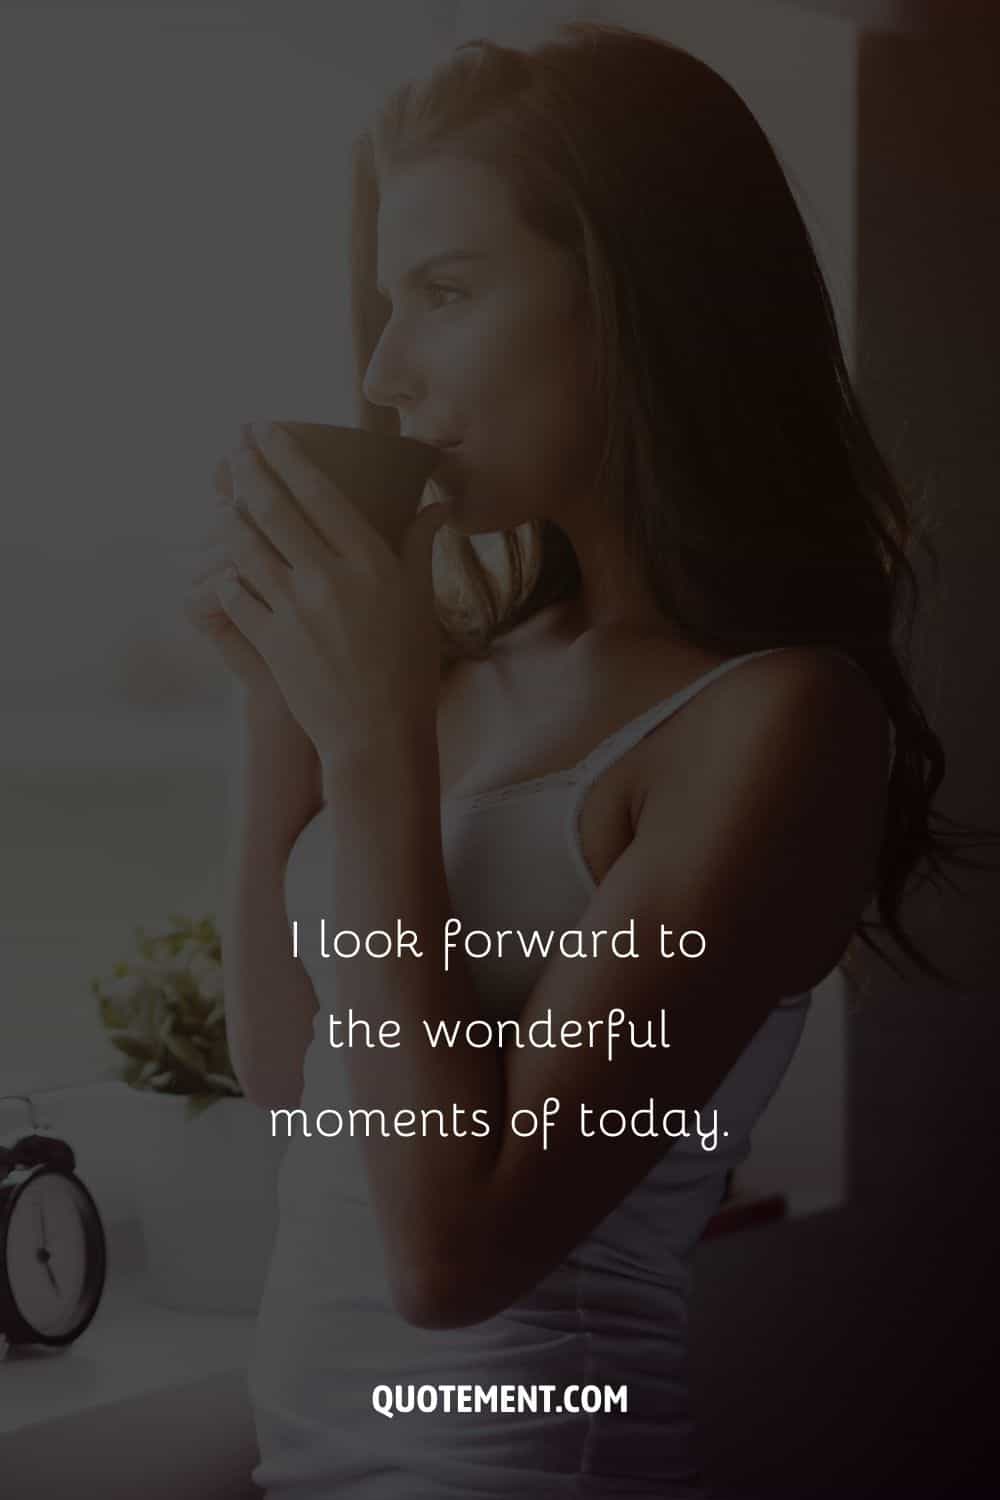 Image of a woman drinking from a cup representing morning affirmation for Friday.